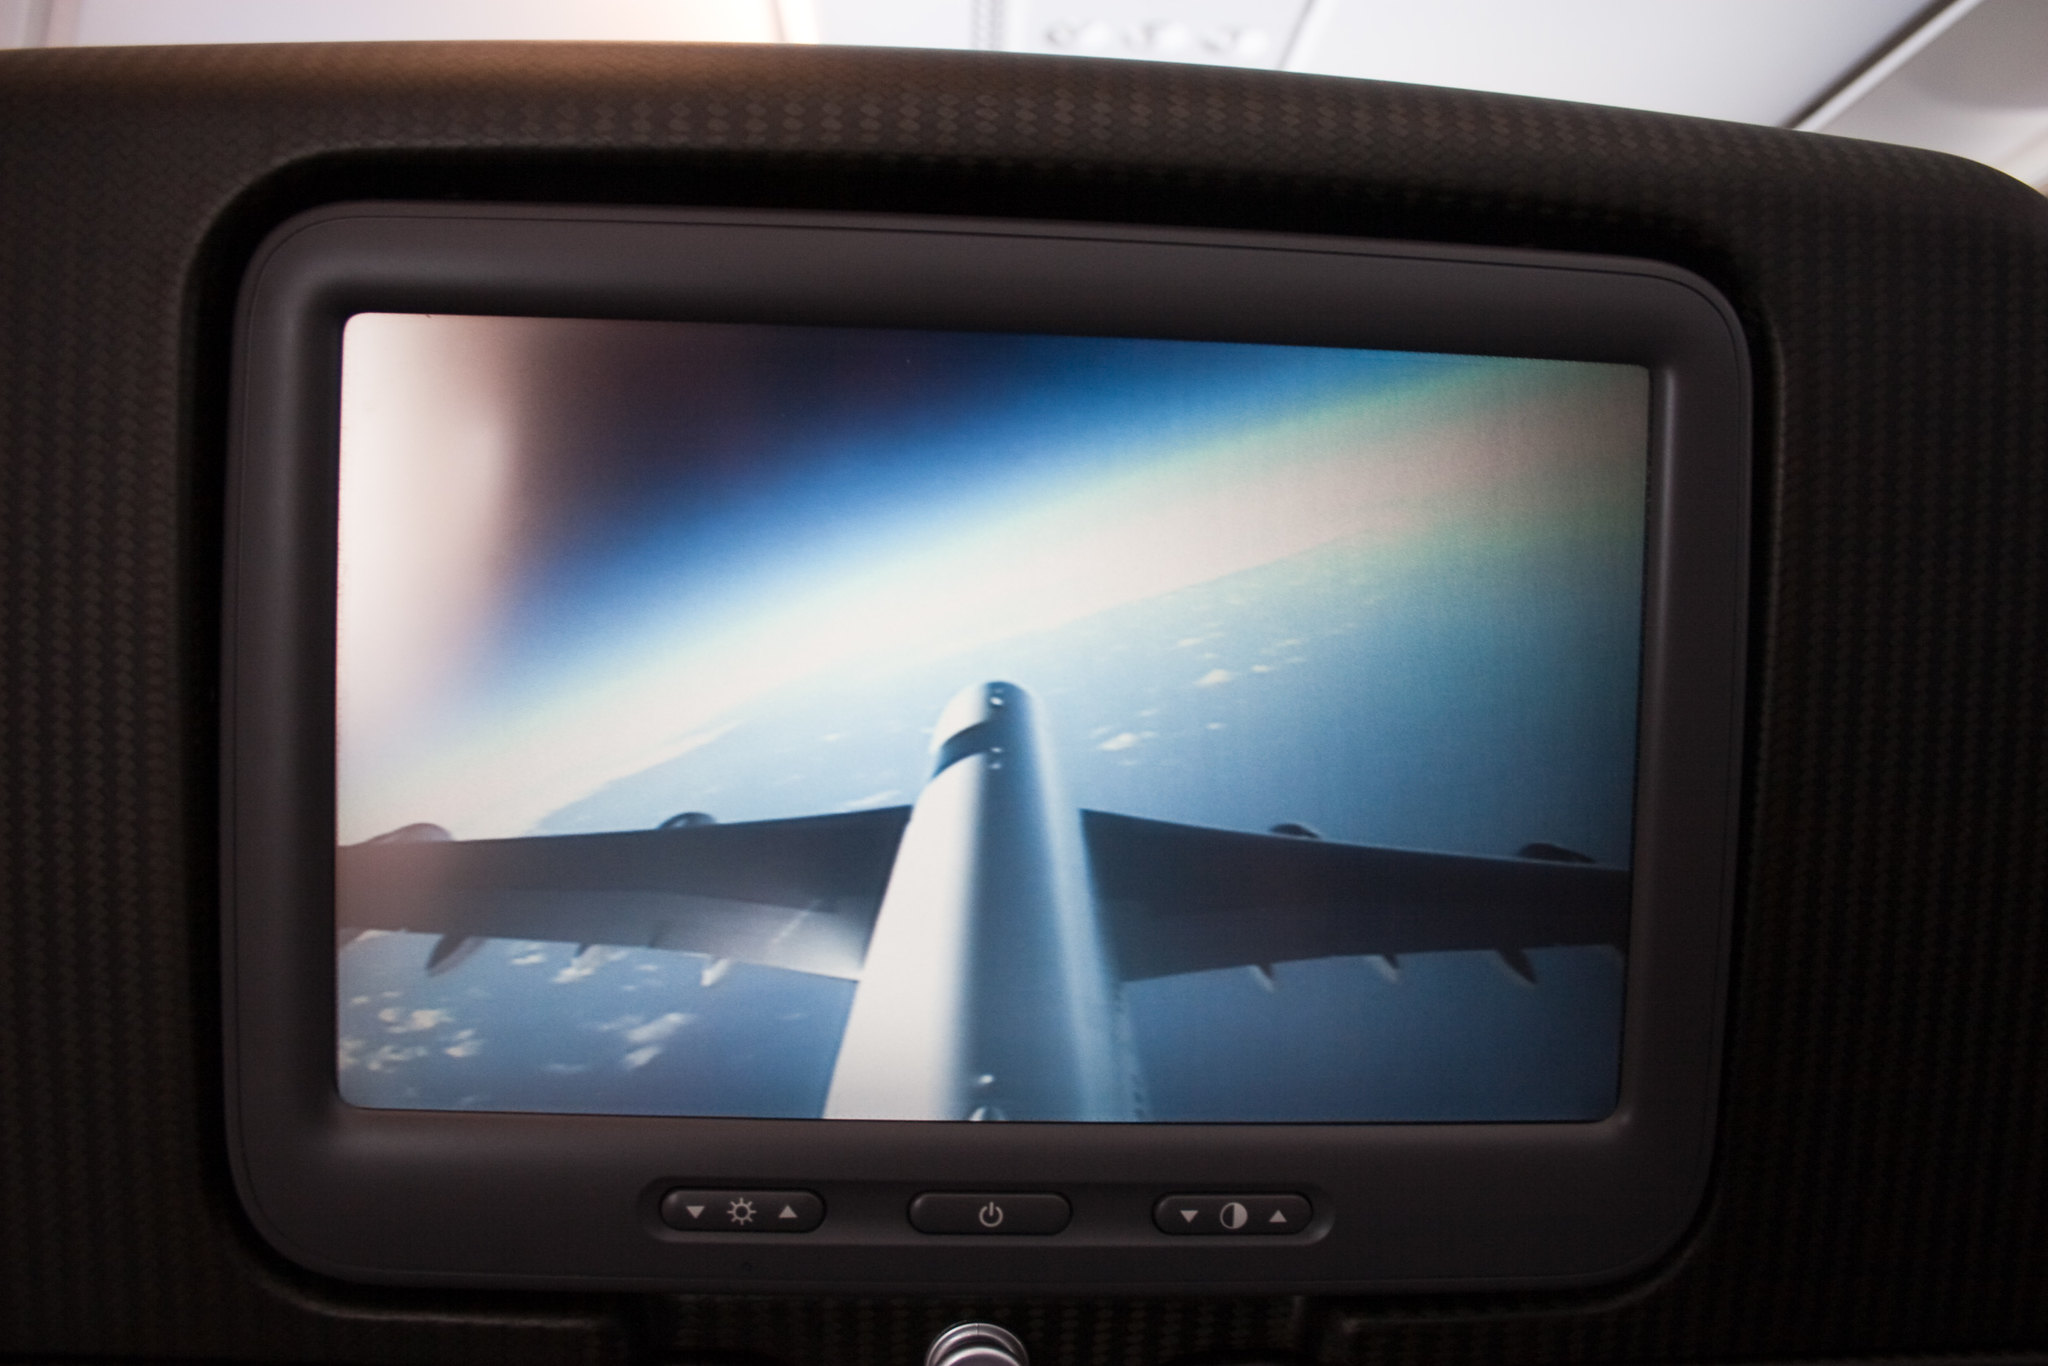 The seat camera provides a great view in flight.